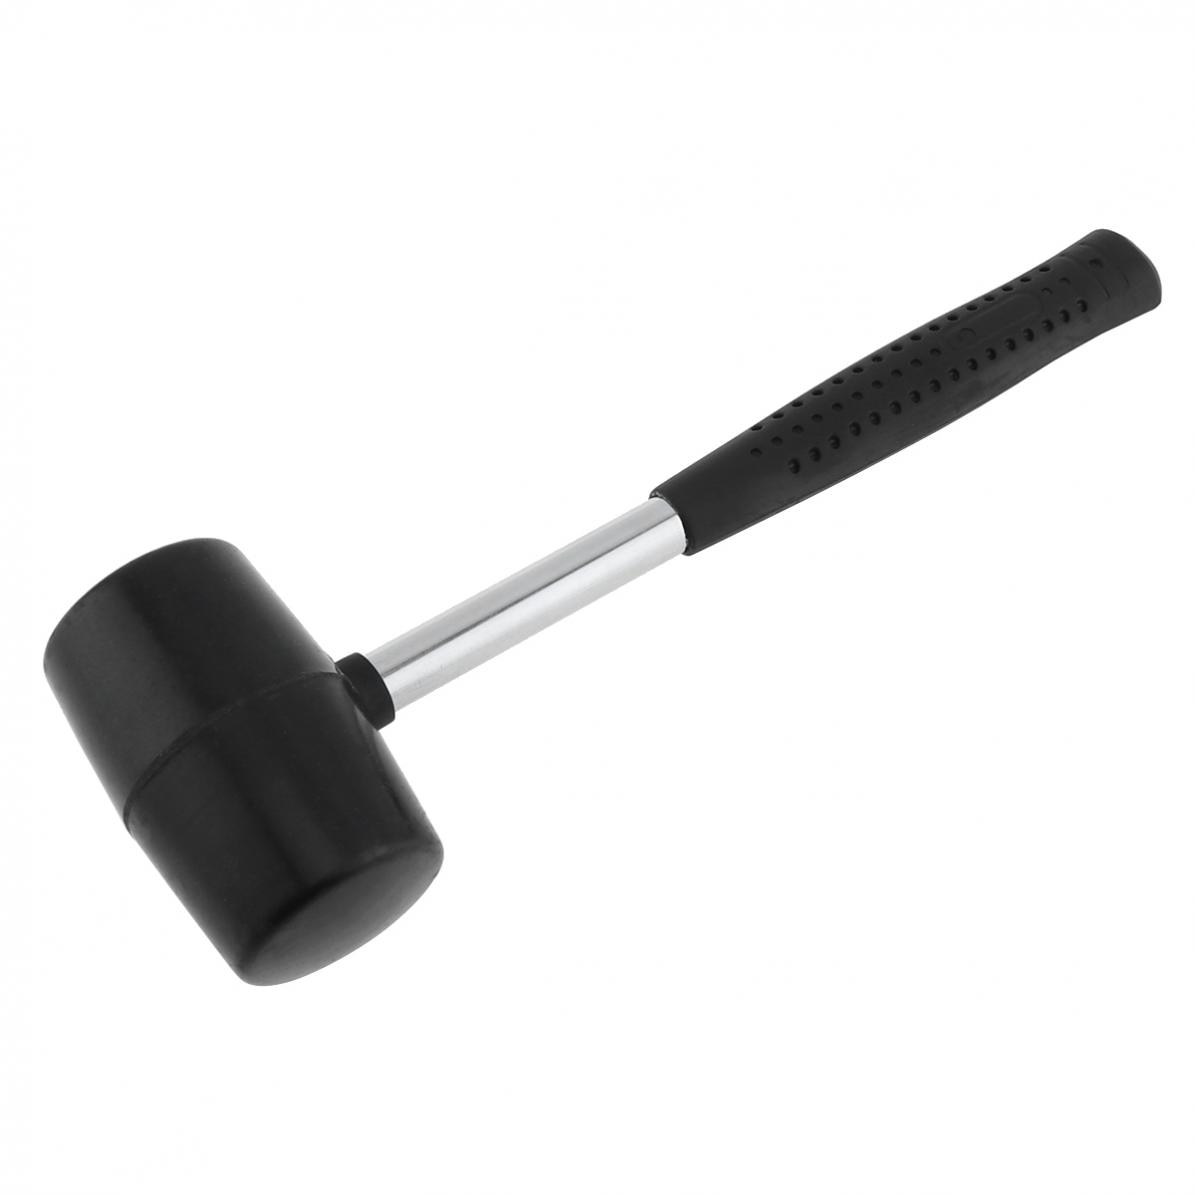 Non-elastic Black Rubber Hammer Wear-resistant Tile Hammer with Round Head and Non-slip Handle DIY Hand Tool